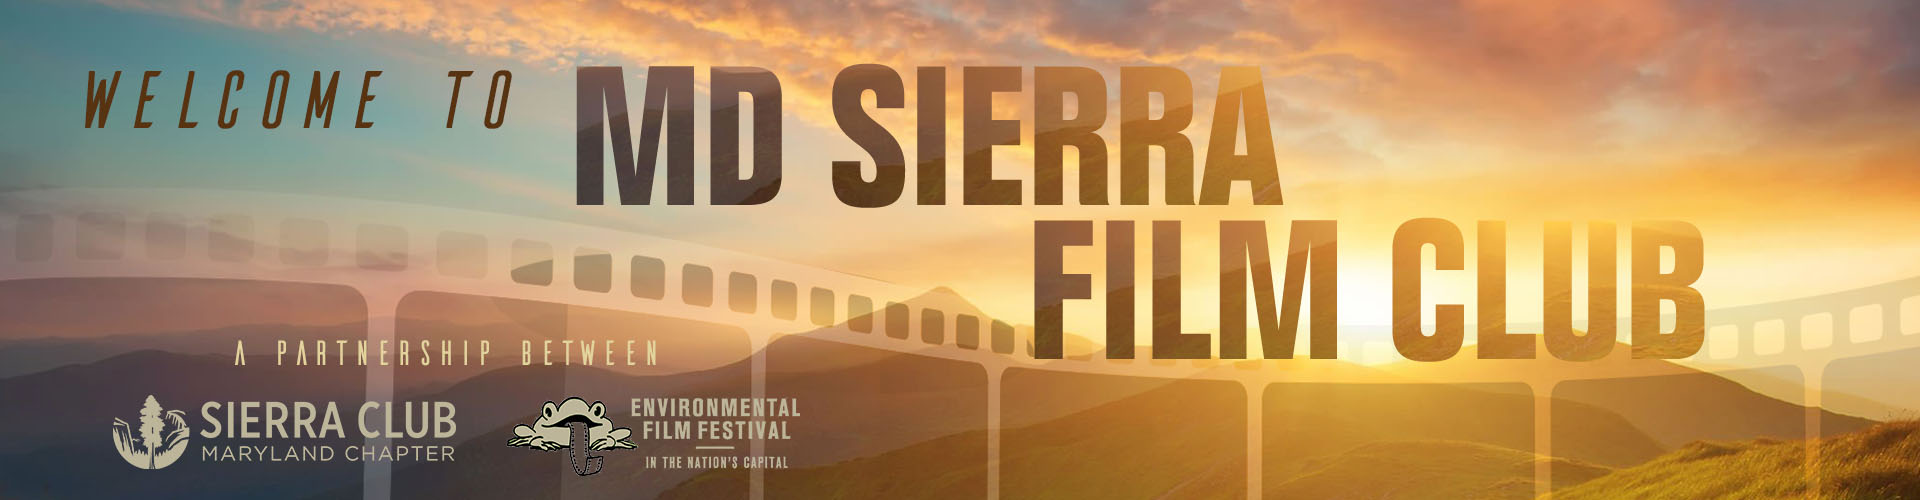 Welcome to MD Sierra Film Club in partnership with Environmental Film Festival in the Nation's Capital and their Frog symbol